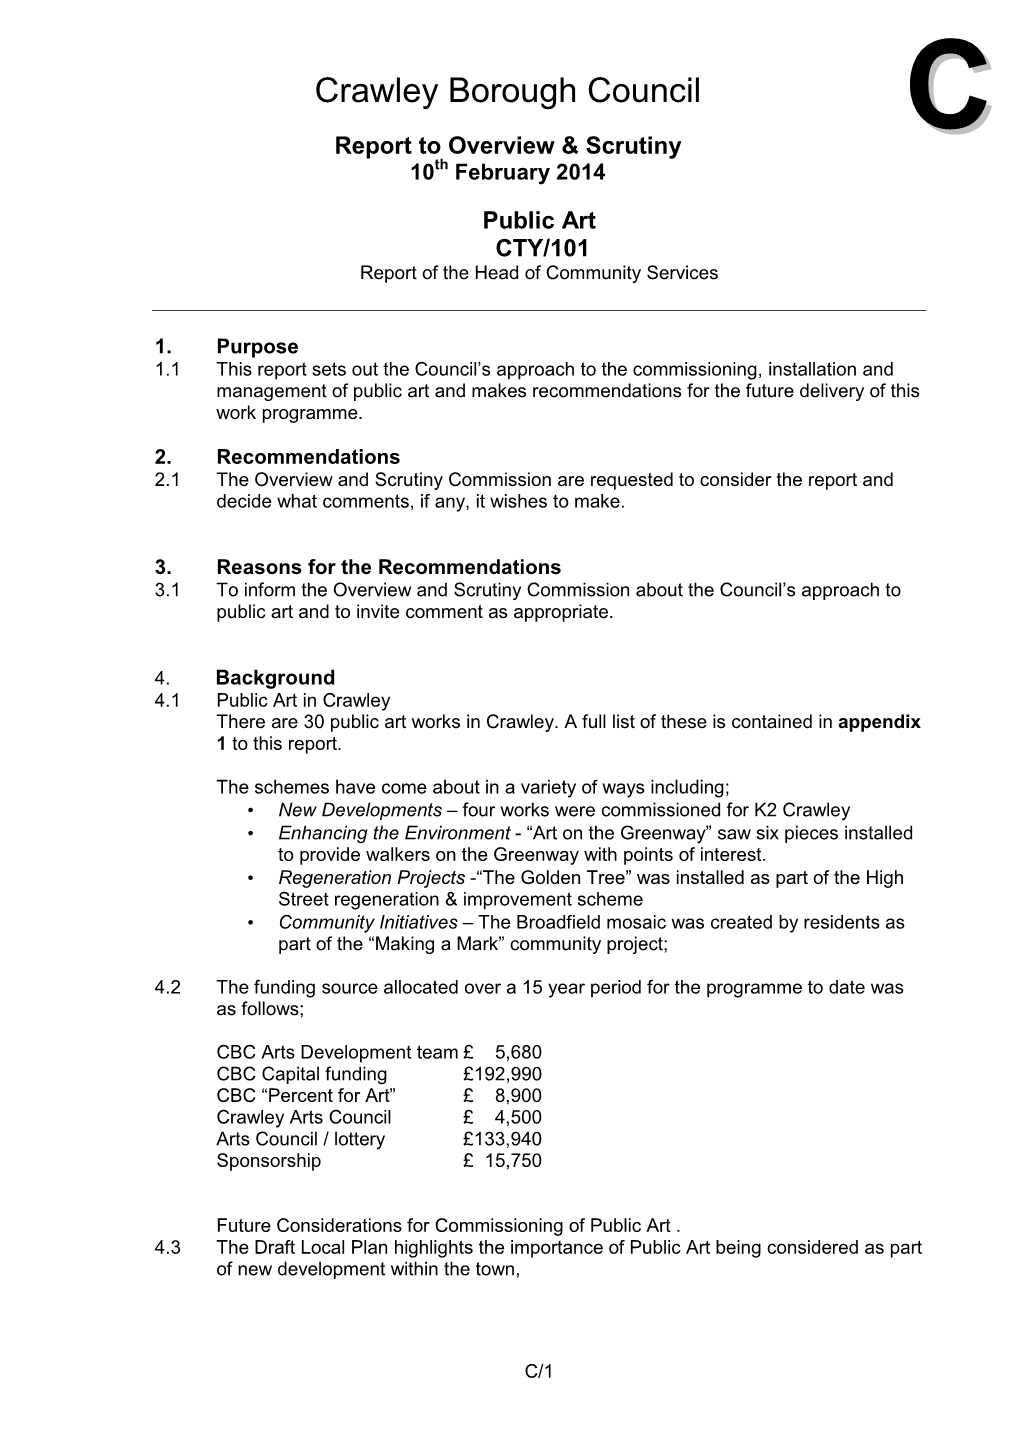 Crawley Borough Council CC Report to Overview & Scrutiny 10Th February 2014